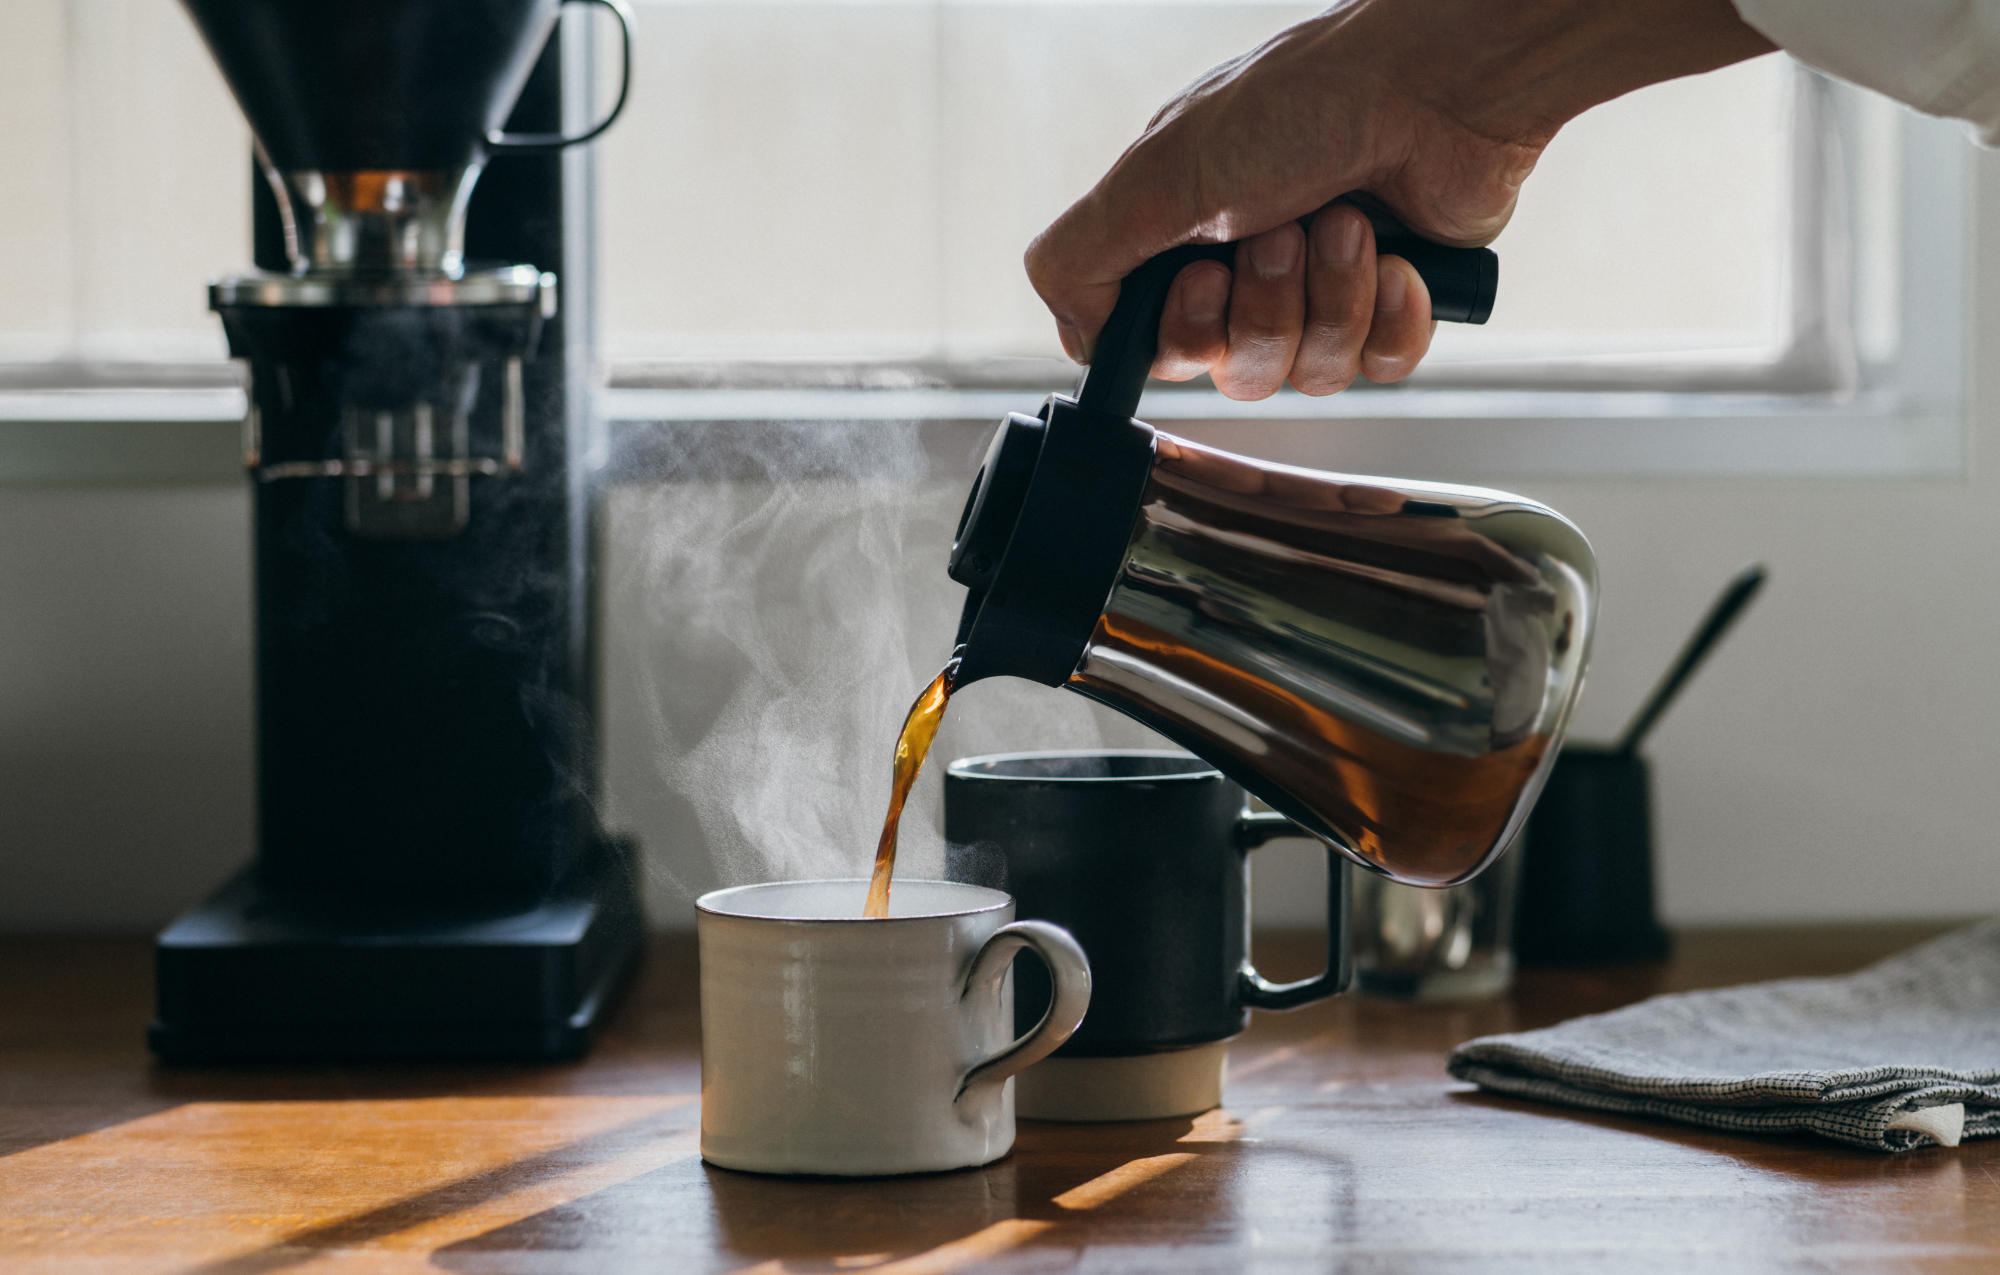 Balmuda The Kettle Review: An Electric Kettle for Coffee Lovers